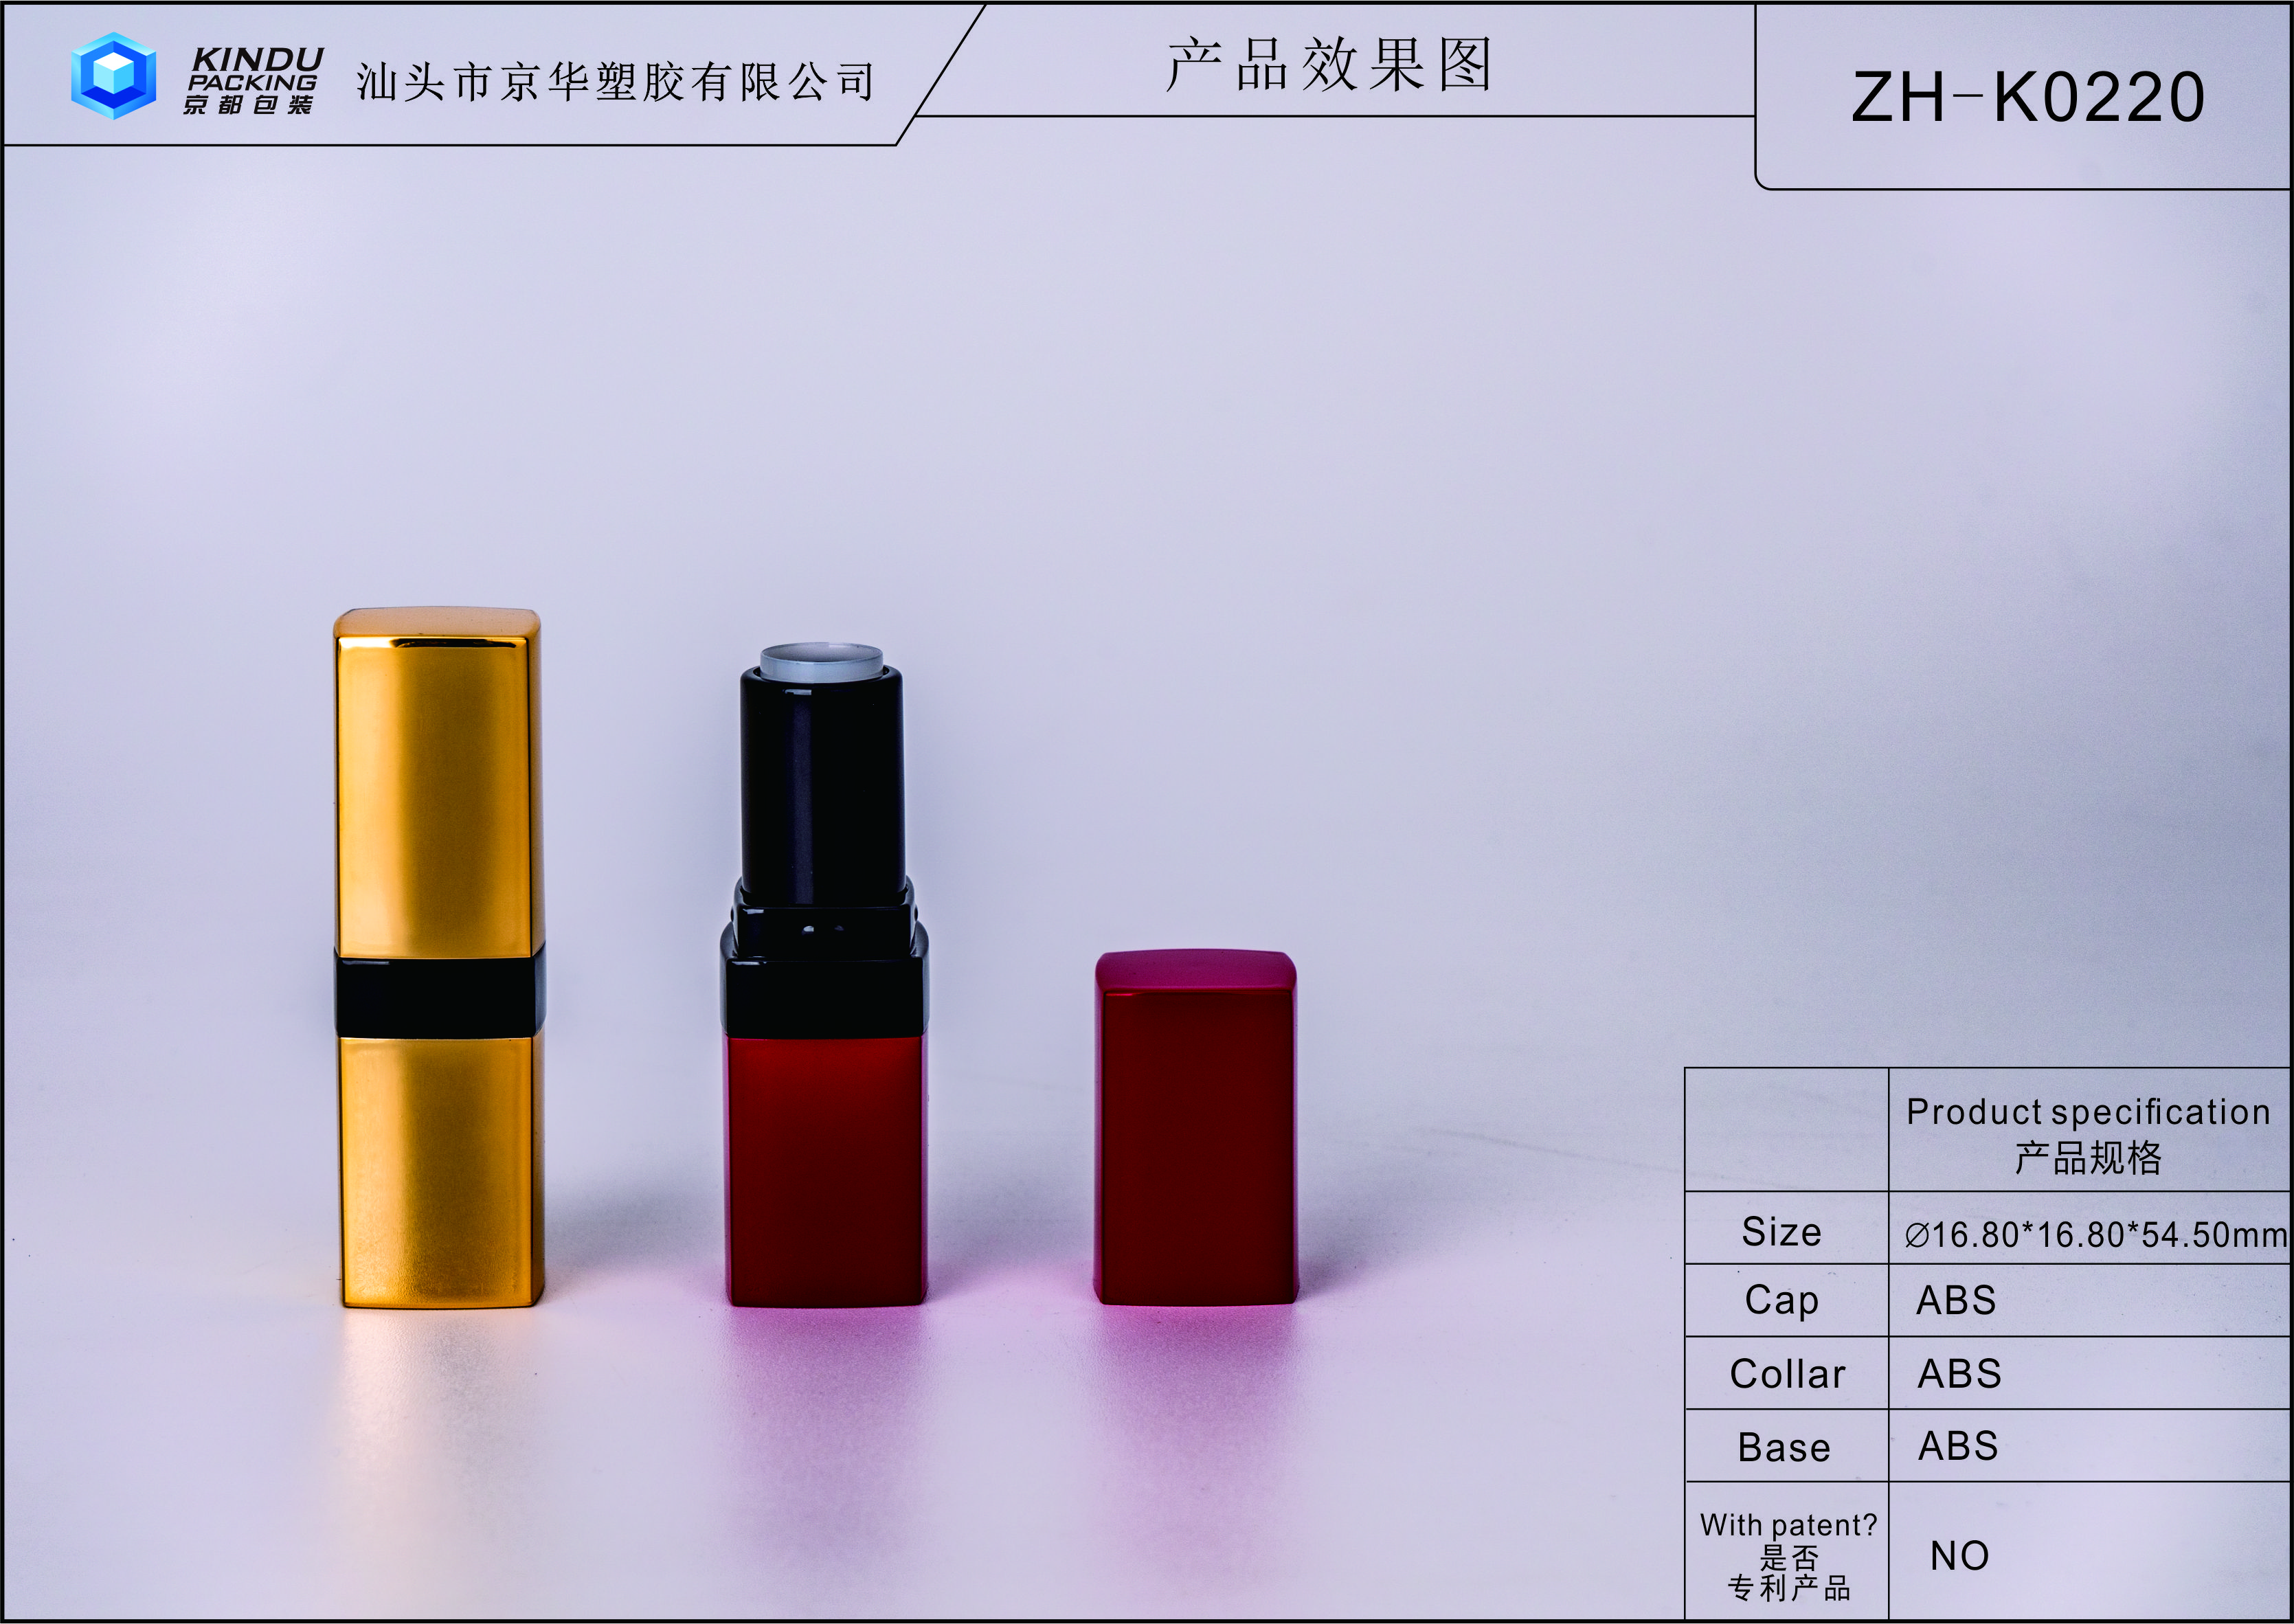 Square lipstick packaging (ZH-K0220)